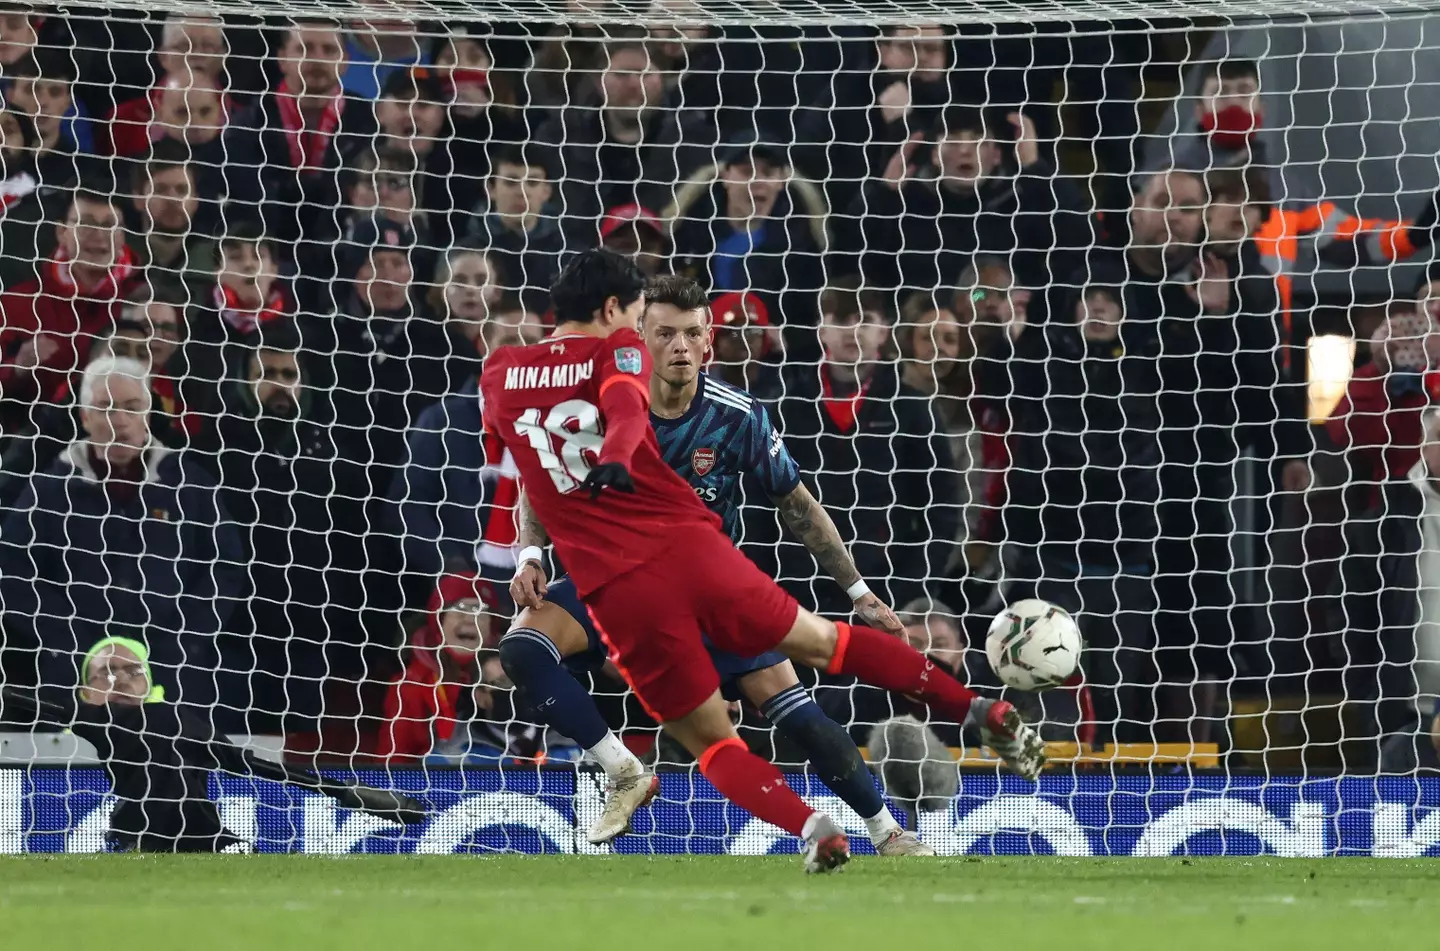 Minamino sliced a shot over the bar in the closing stages at Anfield (Image: Alamy)